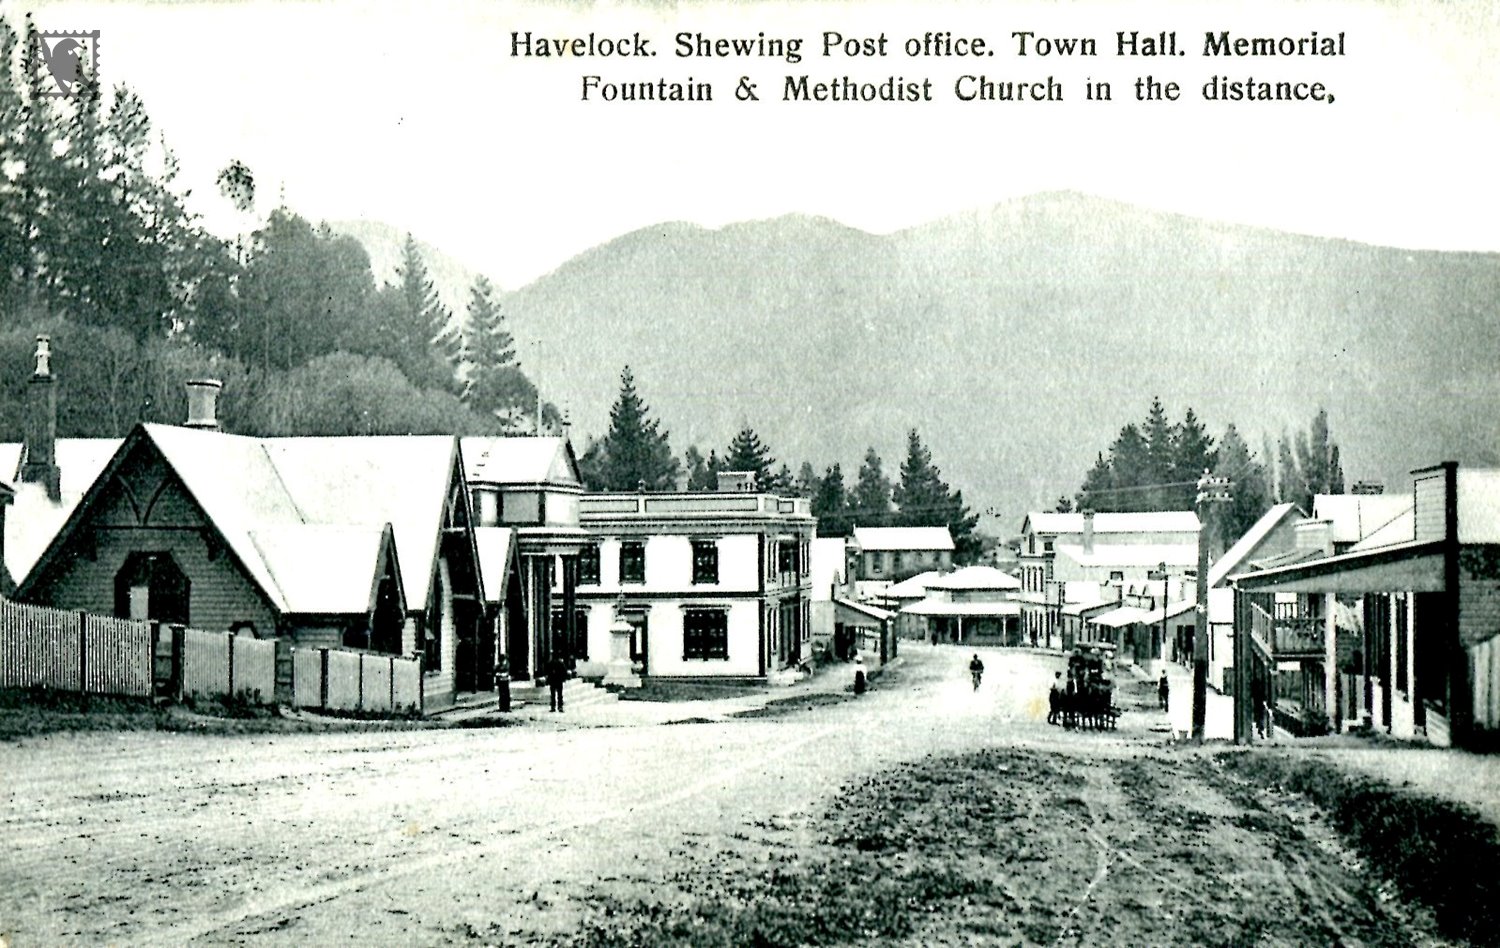 Lucknow Street Havelock (Looking North)